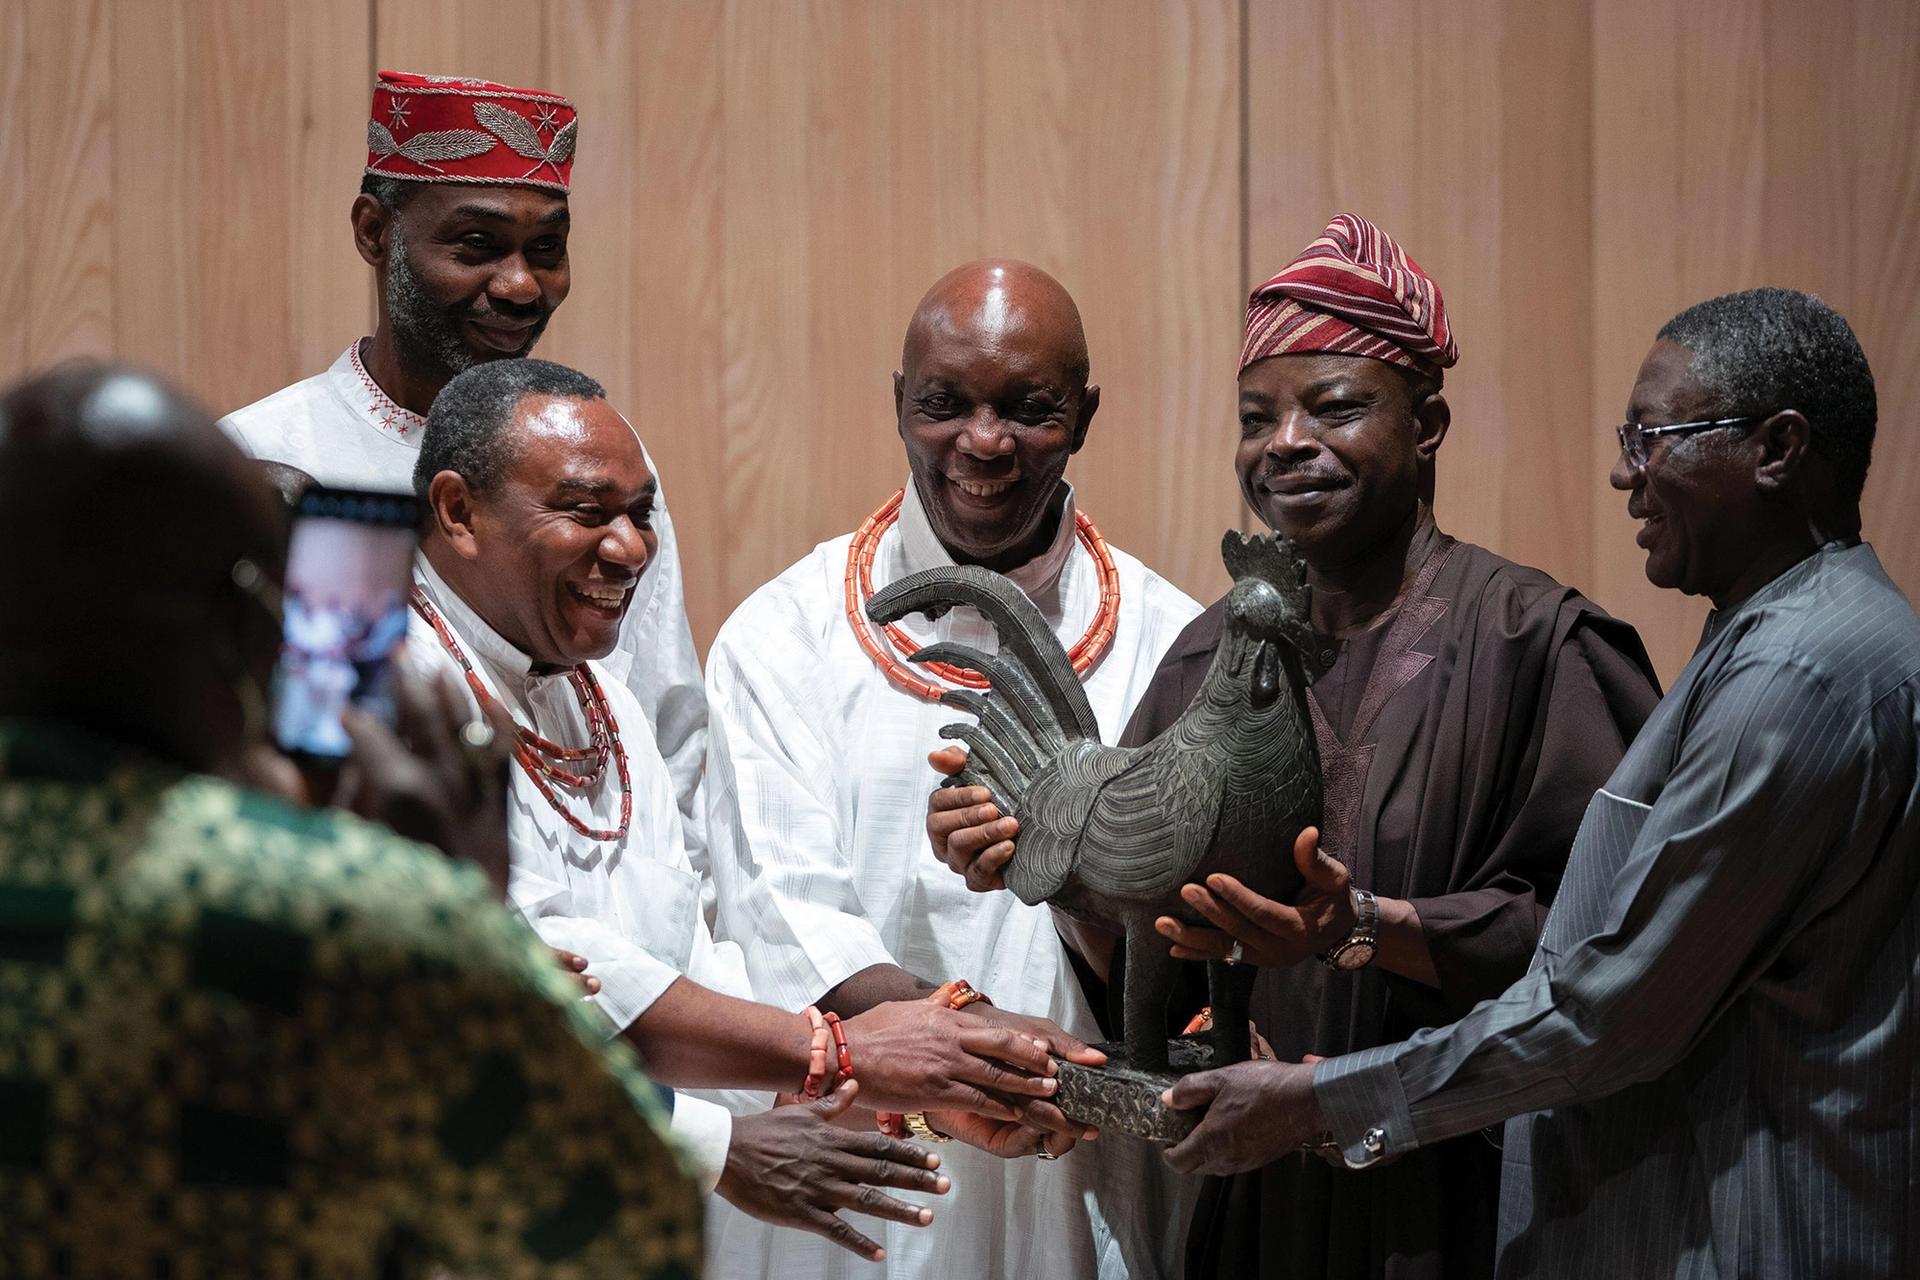 Nigerian delegates including Prince Aghatise Erediauwa (centre) and Abba Isa Tijani (far right), the director of the National Commission for Museums and Monuments, received a Benin sculpture of a cockerel in a handover ceremony last year at Jesus College, Cambridge © Joe Giddens/PA Images/Alamy